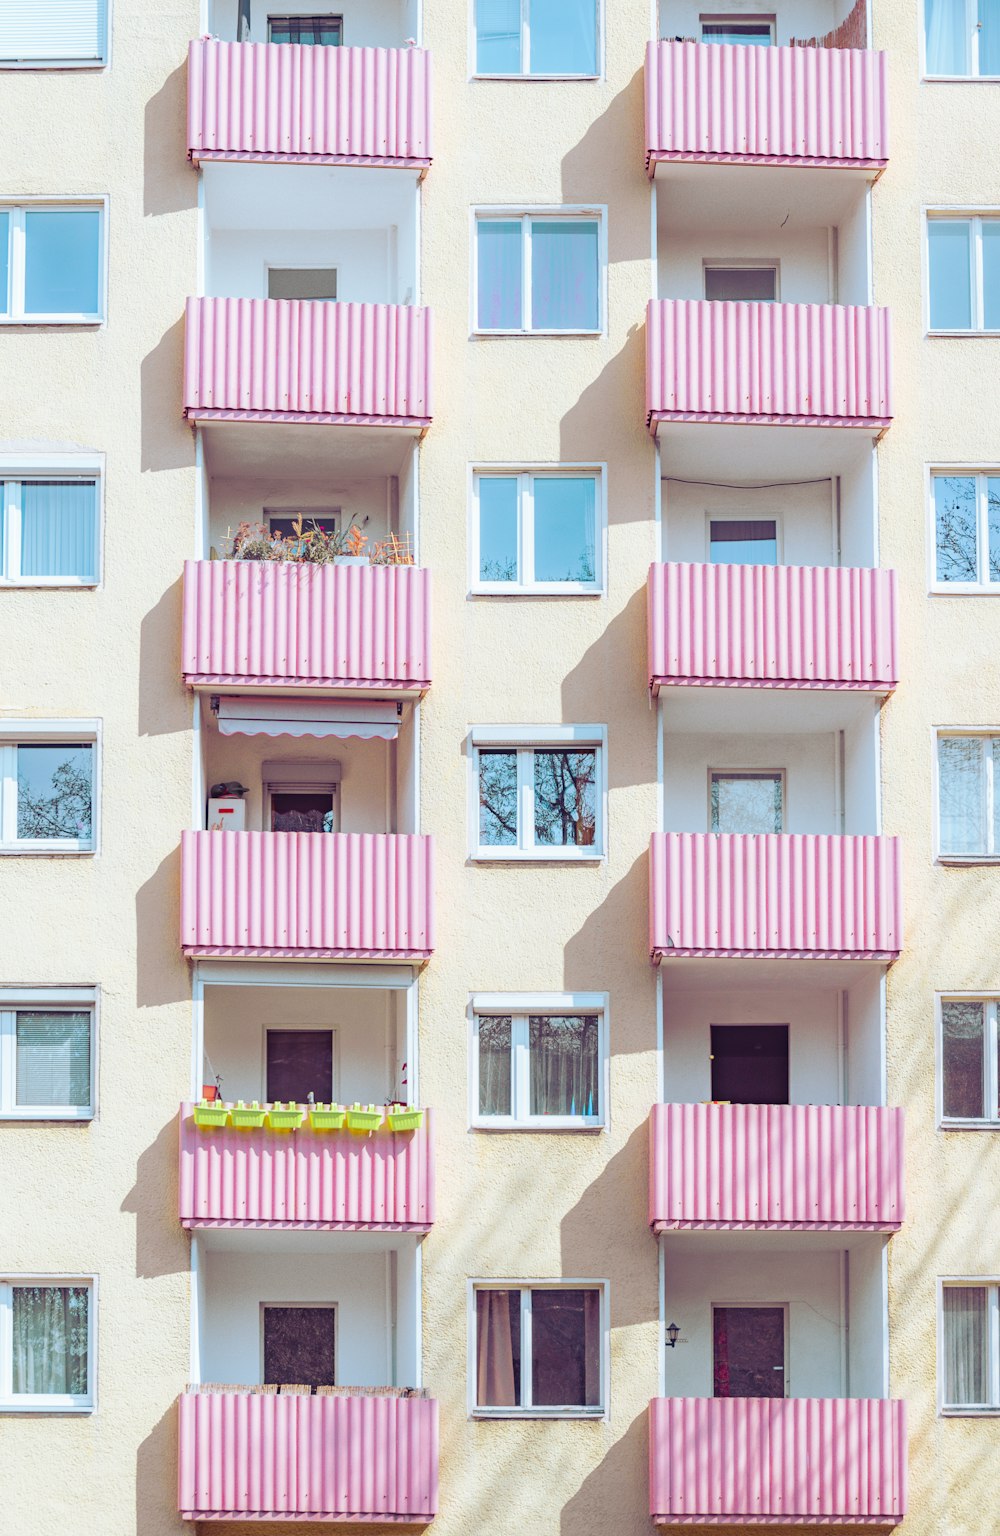 a pink and white building with balconies and windows